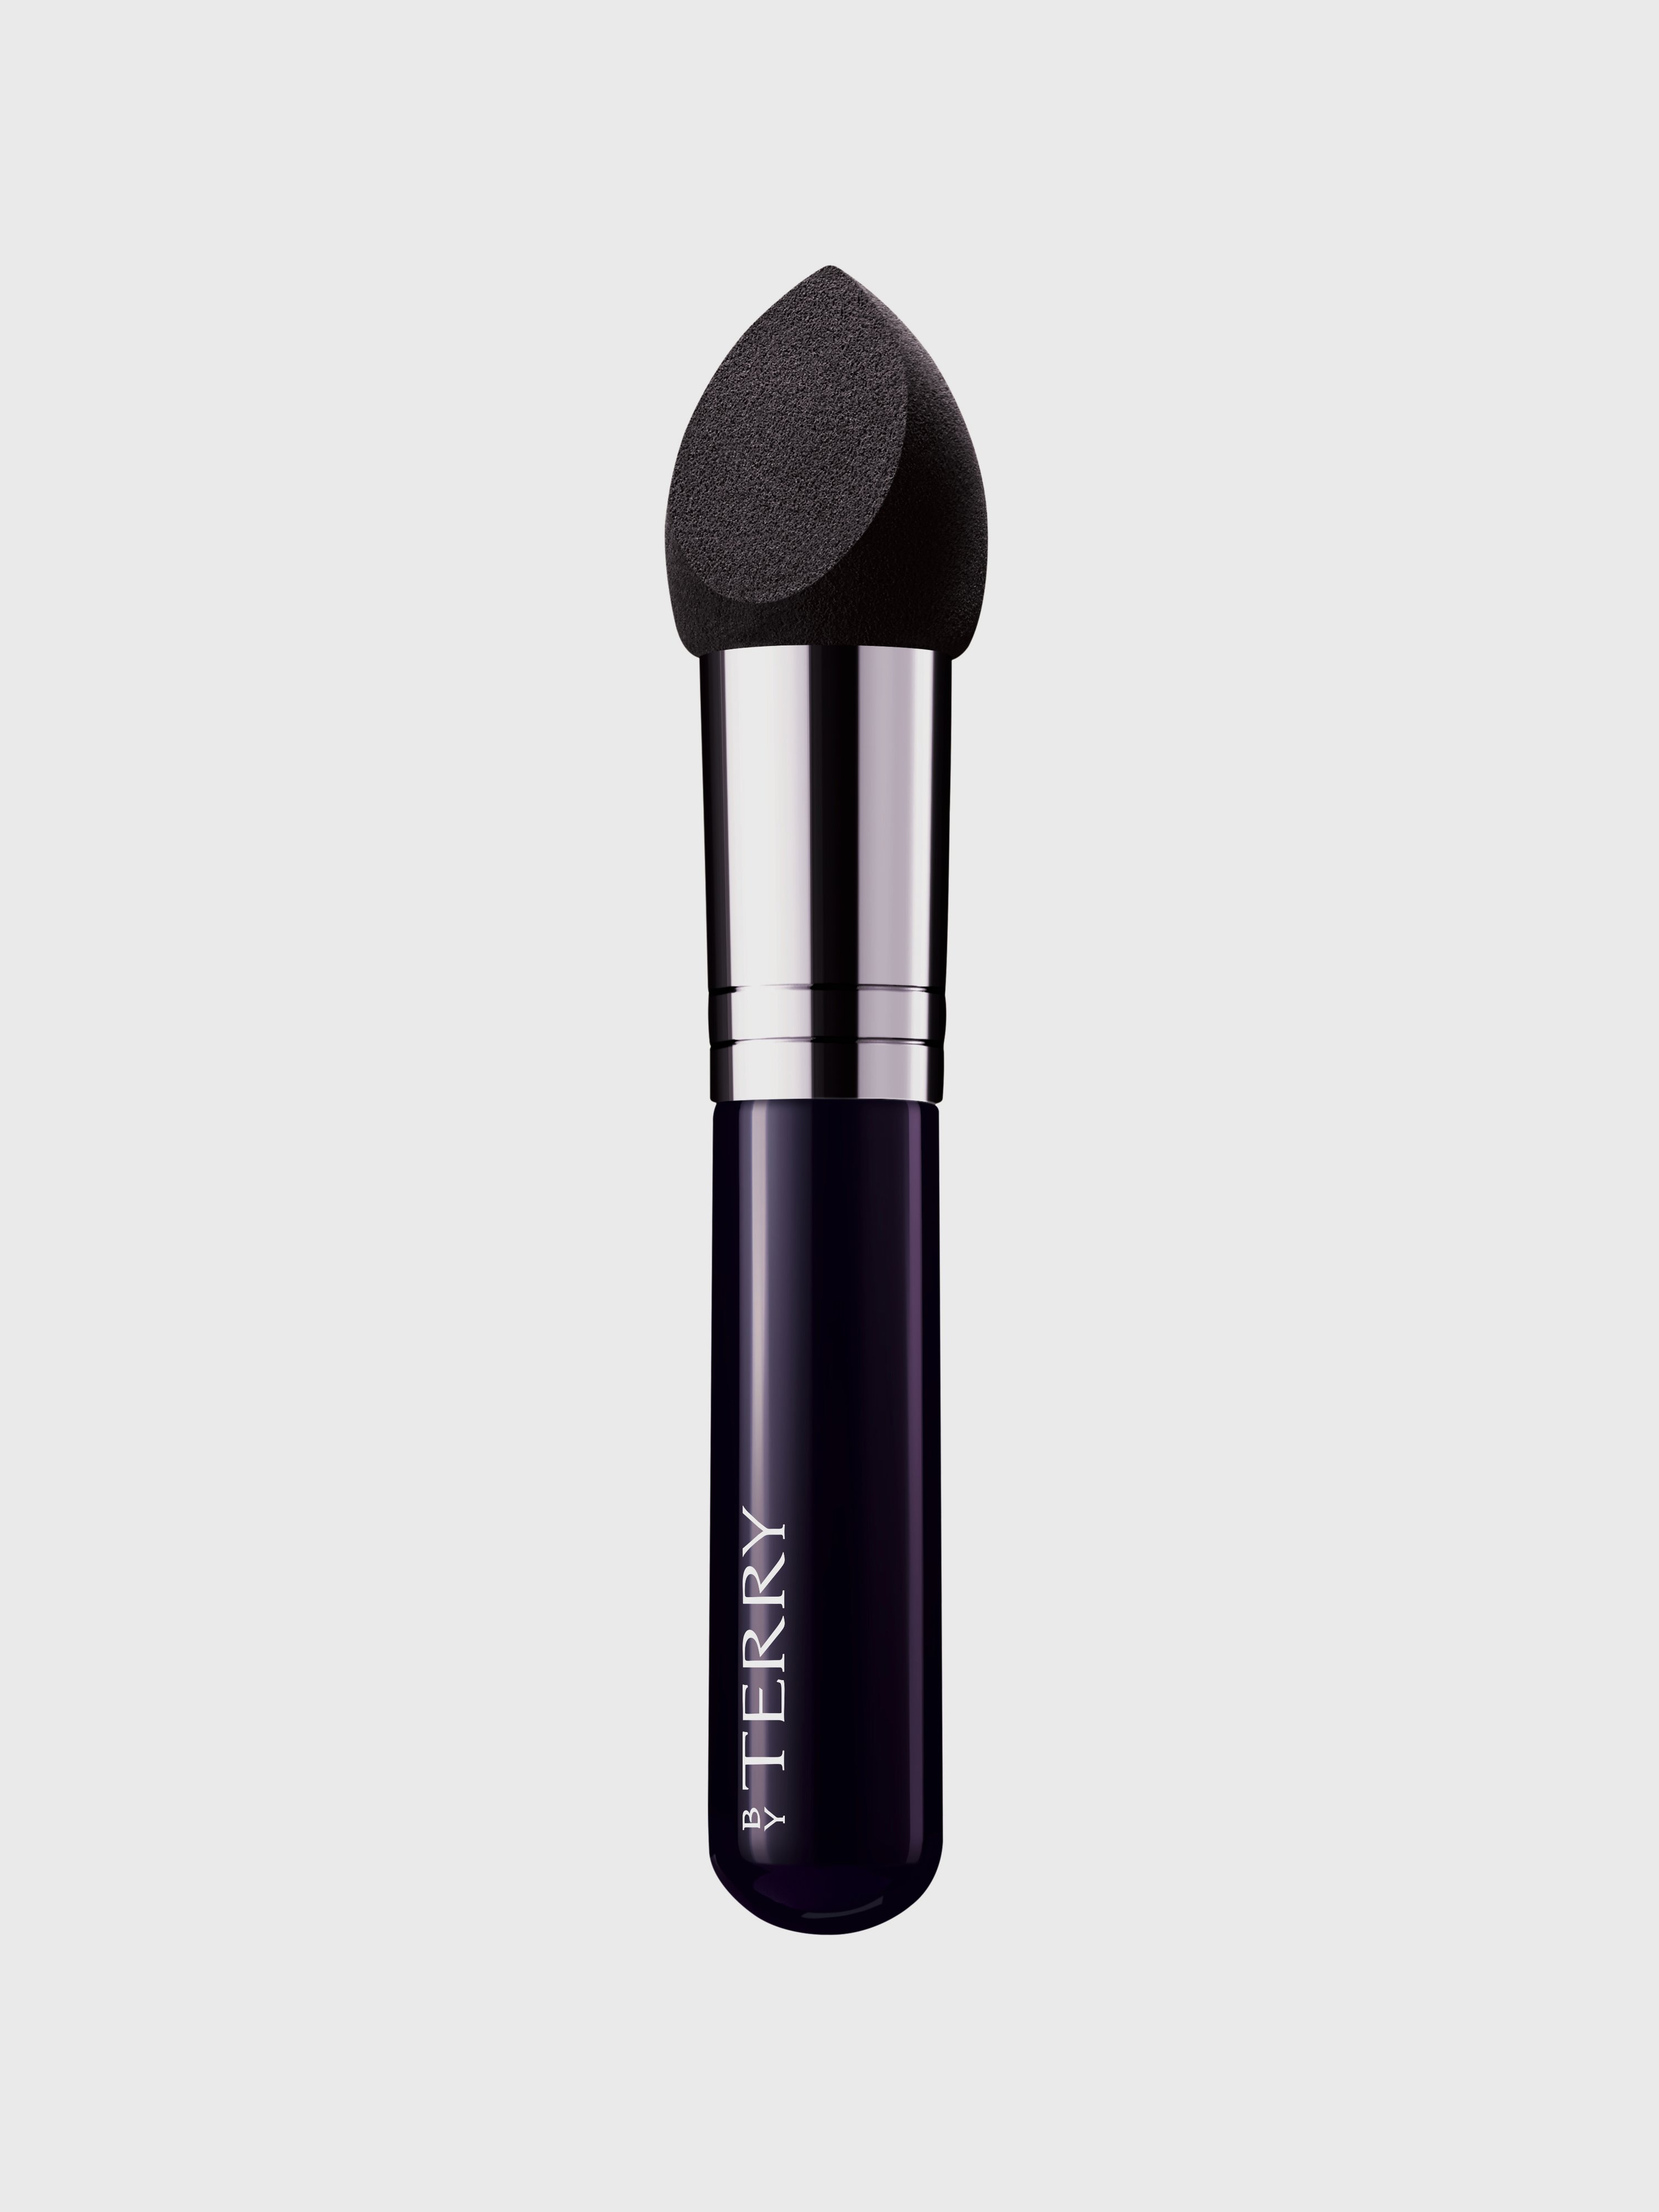 BY TERRY BY TERRY SPONGE FOUNDATION BRUSH